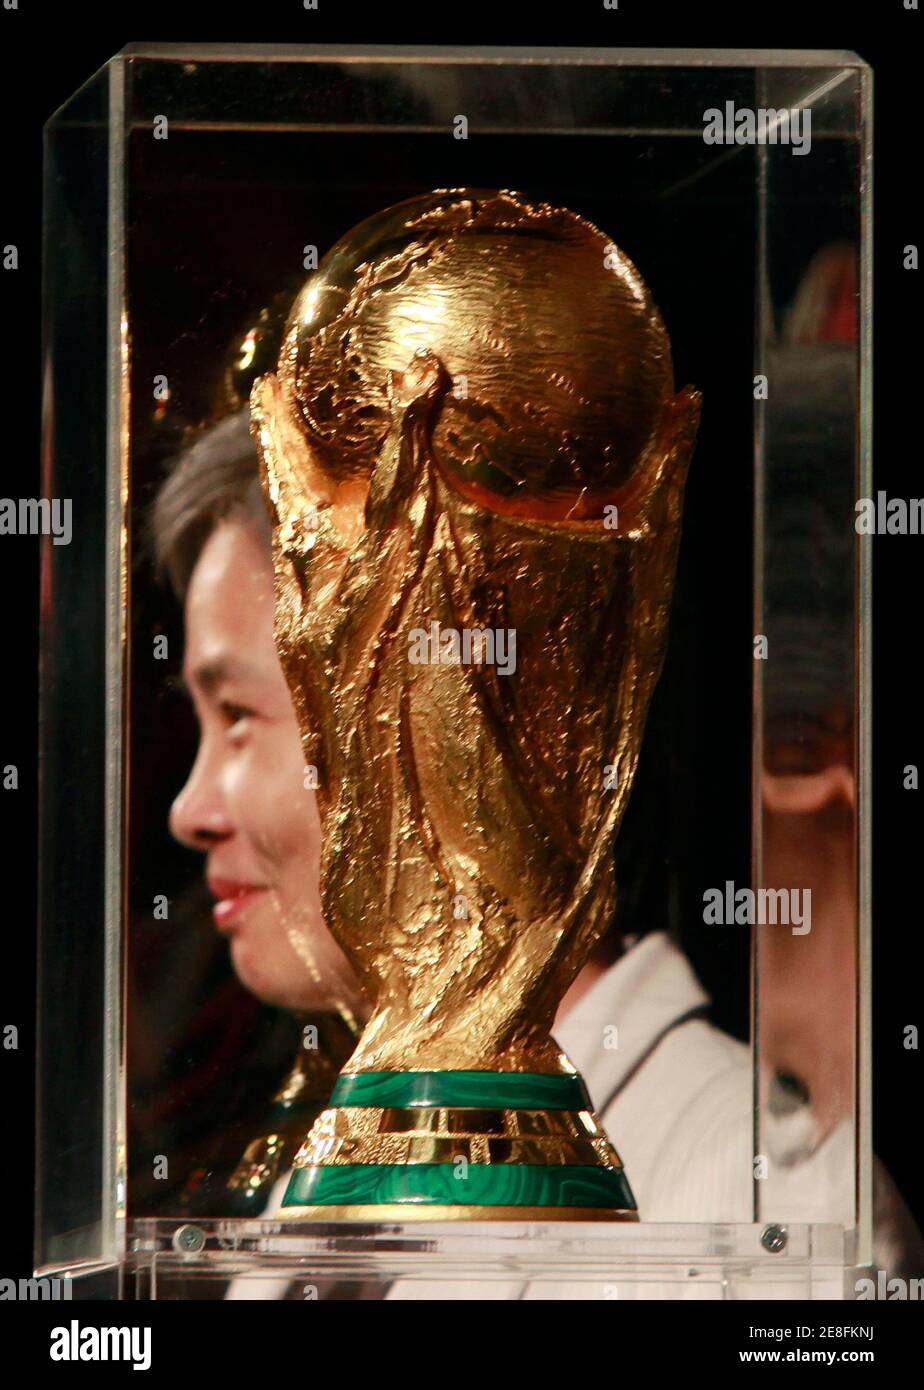 A fan poses with the FIFA World Cup trophy at a shopping mall in Bangkok January 22, 2010. The trophy will be in Bangkok for three days as part of its tour around the world for soccer fans. REUTERS/Chaiwat Subprasom  (THAILAND - Tags: SPORT SOCCER) Stock Photo